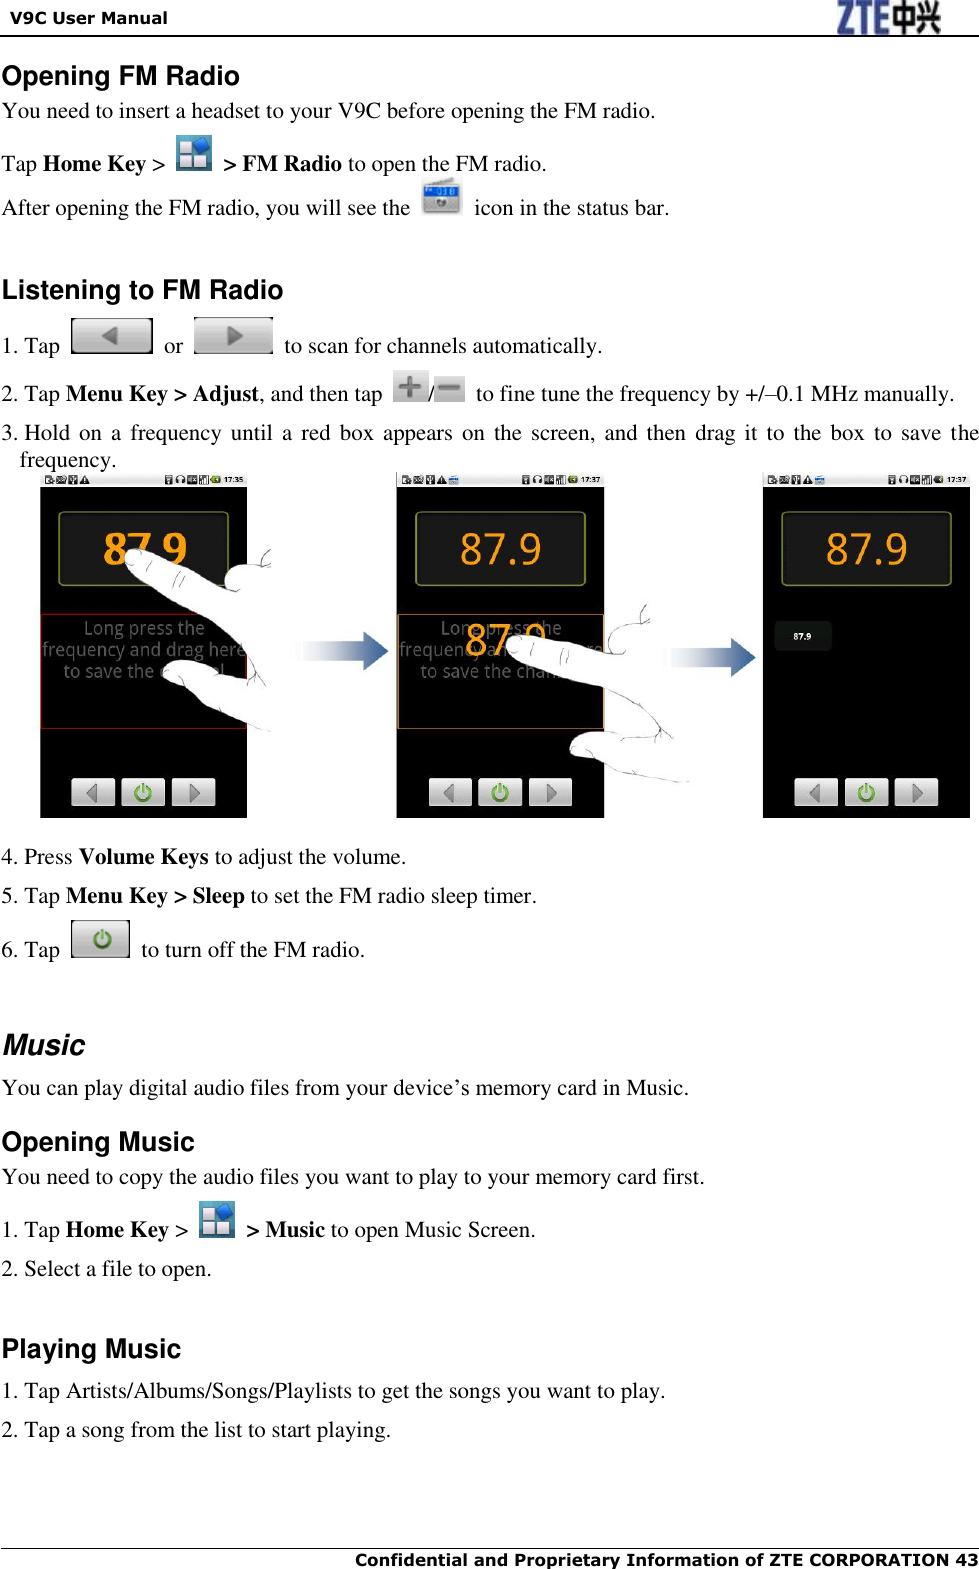   V9C User Manual  Confidential and Proprietary Information of ZTE CORPORATION 43   Opening FM Radio You need to insert a headset to your V9C before opening the FM radio. Tap Home Key &gt;    &gt; FM Radio to open the FM radio. After opening the FM radio, you will see the    icon in the status bar.   Listening to FM Radio 1. Tap    or    to scan for channels automatically. 2. Tap Menu Key &gt; Adjust, and then tap  /   to fine tune the frequency by +/–0.1 MHz manually. 3. Hold on  a frequency until  a red  box  appears on the  screen, and then drag it  to the  box to  save the frequency.   4. Press Volume Keys to adjust the volume. 5. Tap Menu Key &gt; Sleep to set the FM radio sleep timer. 6. Tap    to turn off the FM radio.   Music You can play digital audio files from your device‟s memory card in Music.   Opening Music You need to copy the audio files you want to play to your memory card first. 1. Tap Home Key &gt;    &gt; Music to open Music Screen. 2. Select a file to open.  Playing Music 1. Tap Artists/Albums/Songs/Playlists to get the songs you want to play. 2. Tap a song from the list to start playing. 